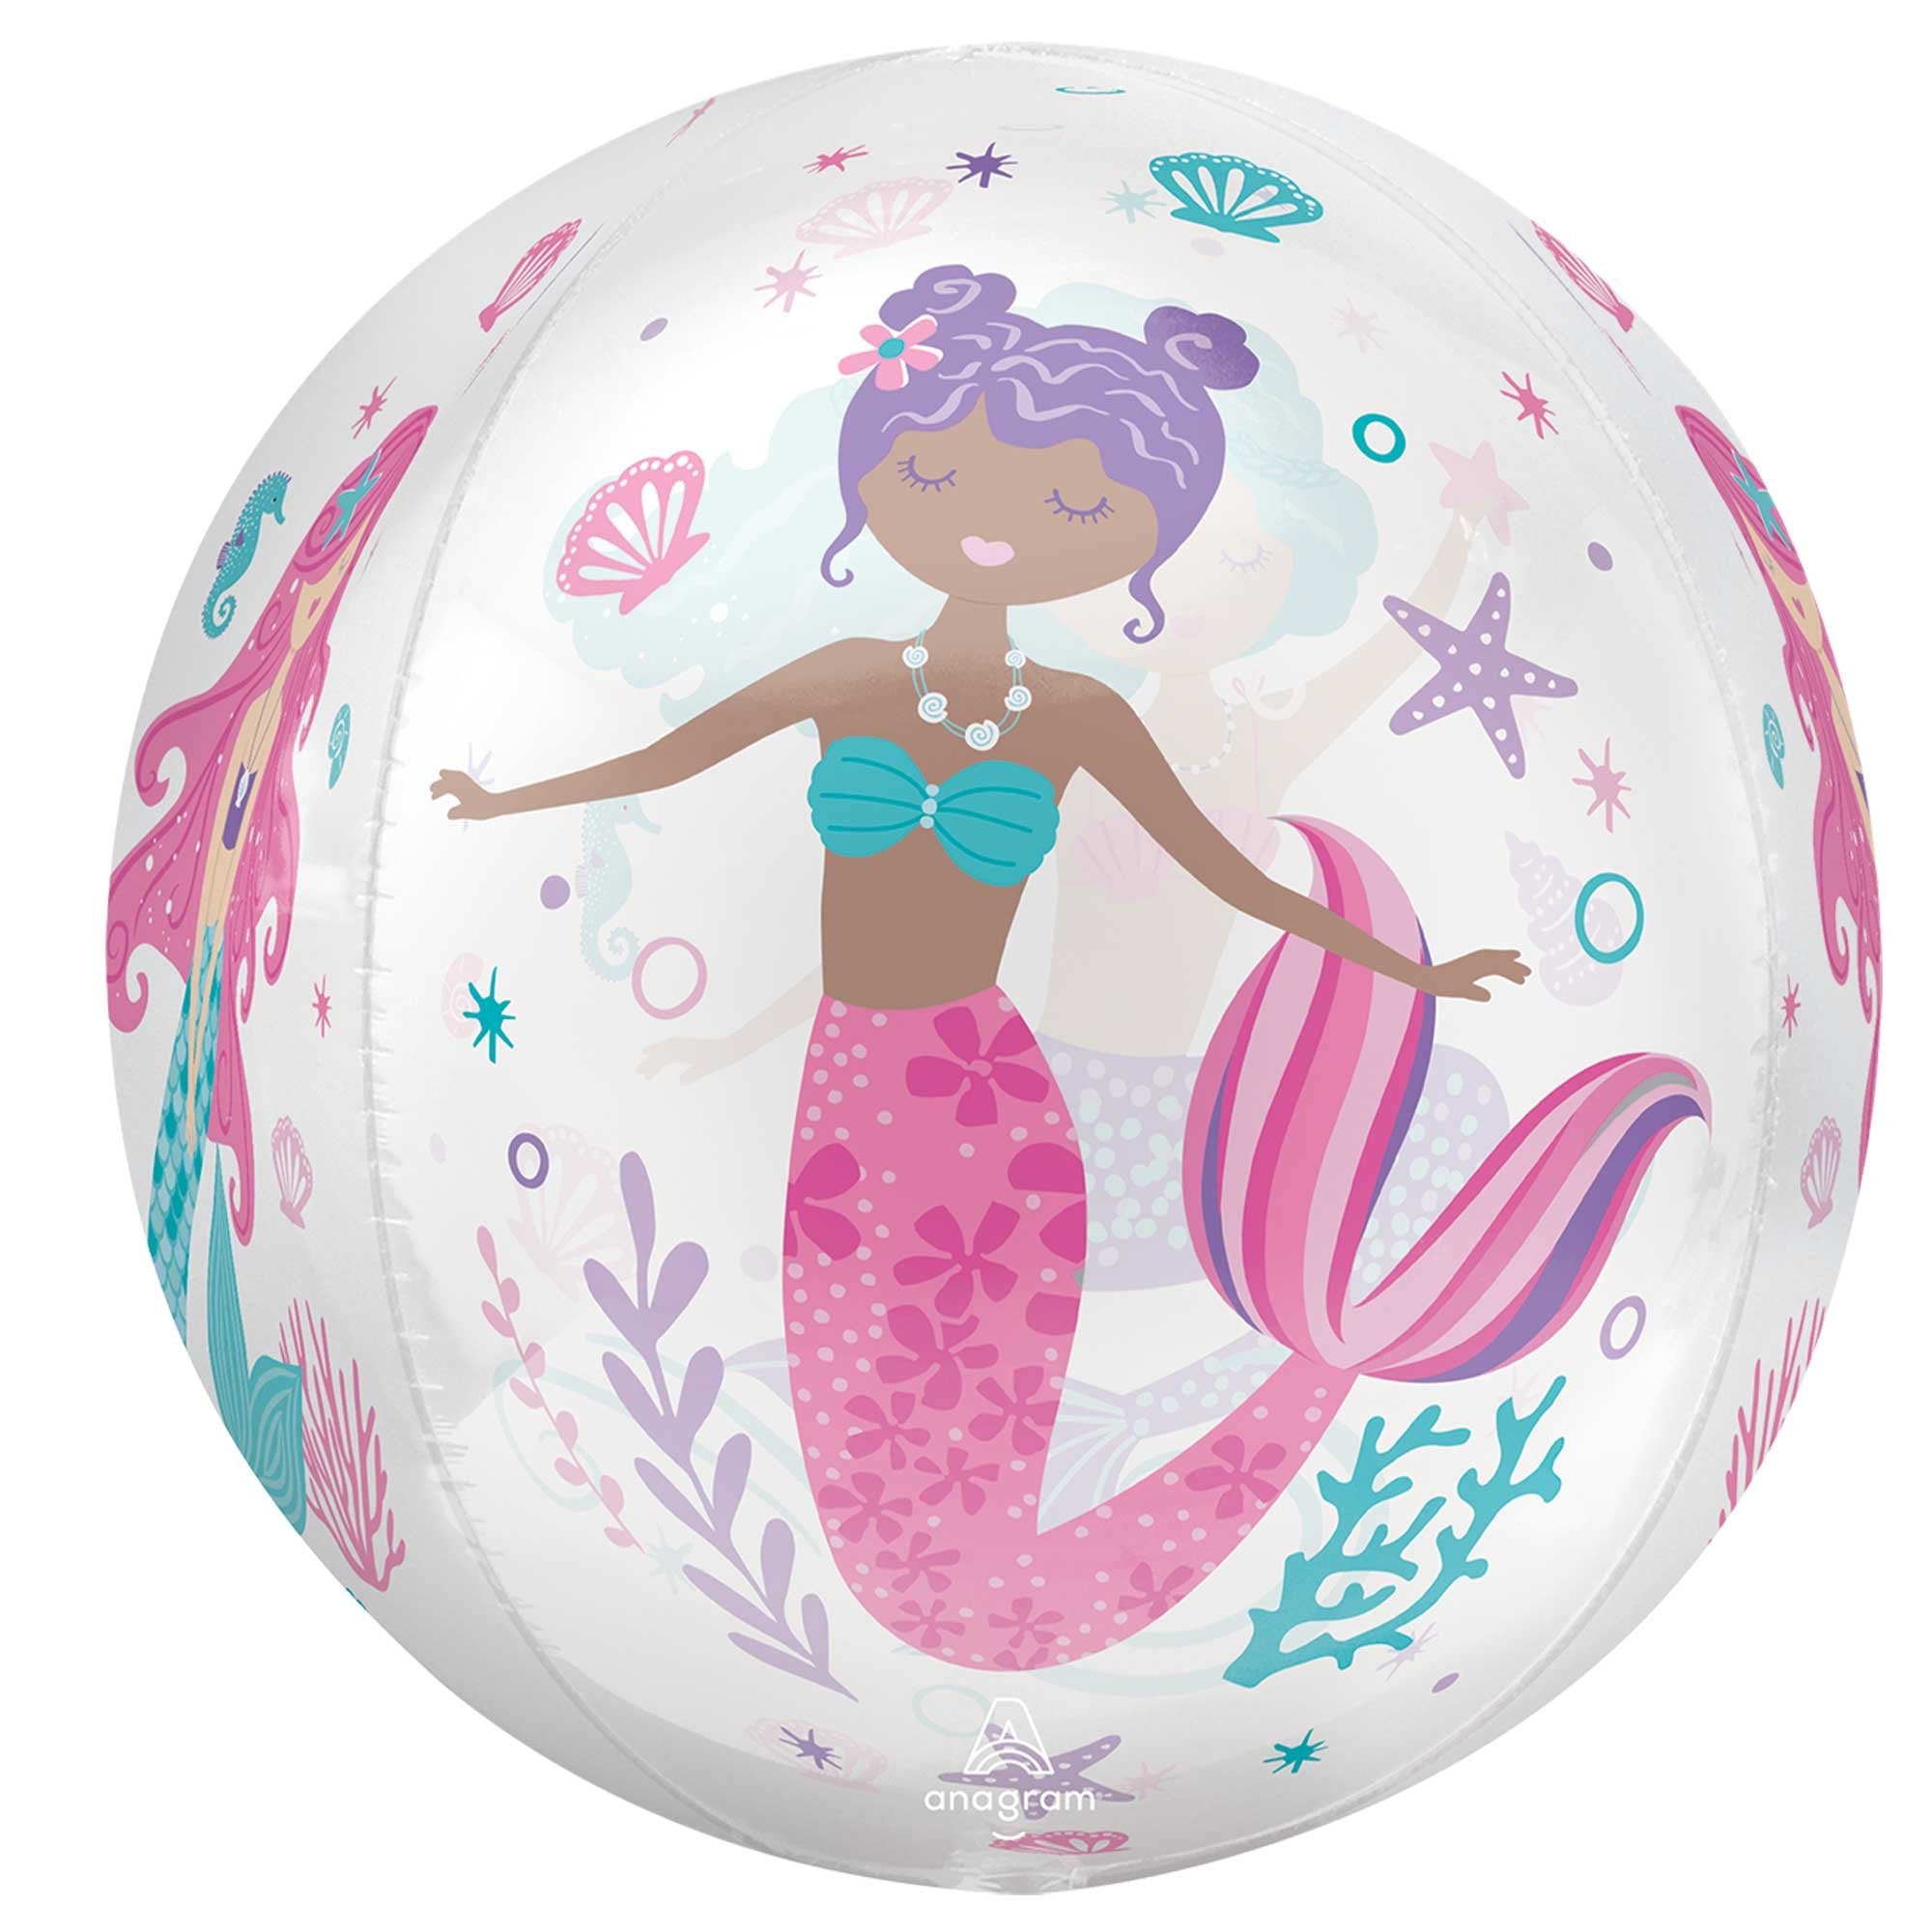 Party Empress' Orbz Foil Balloons are perfect for various events and celebrations, including birthdays, weddings, baby showers, and themed parties. 